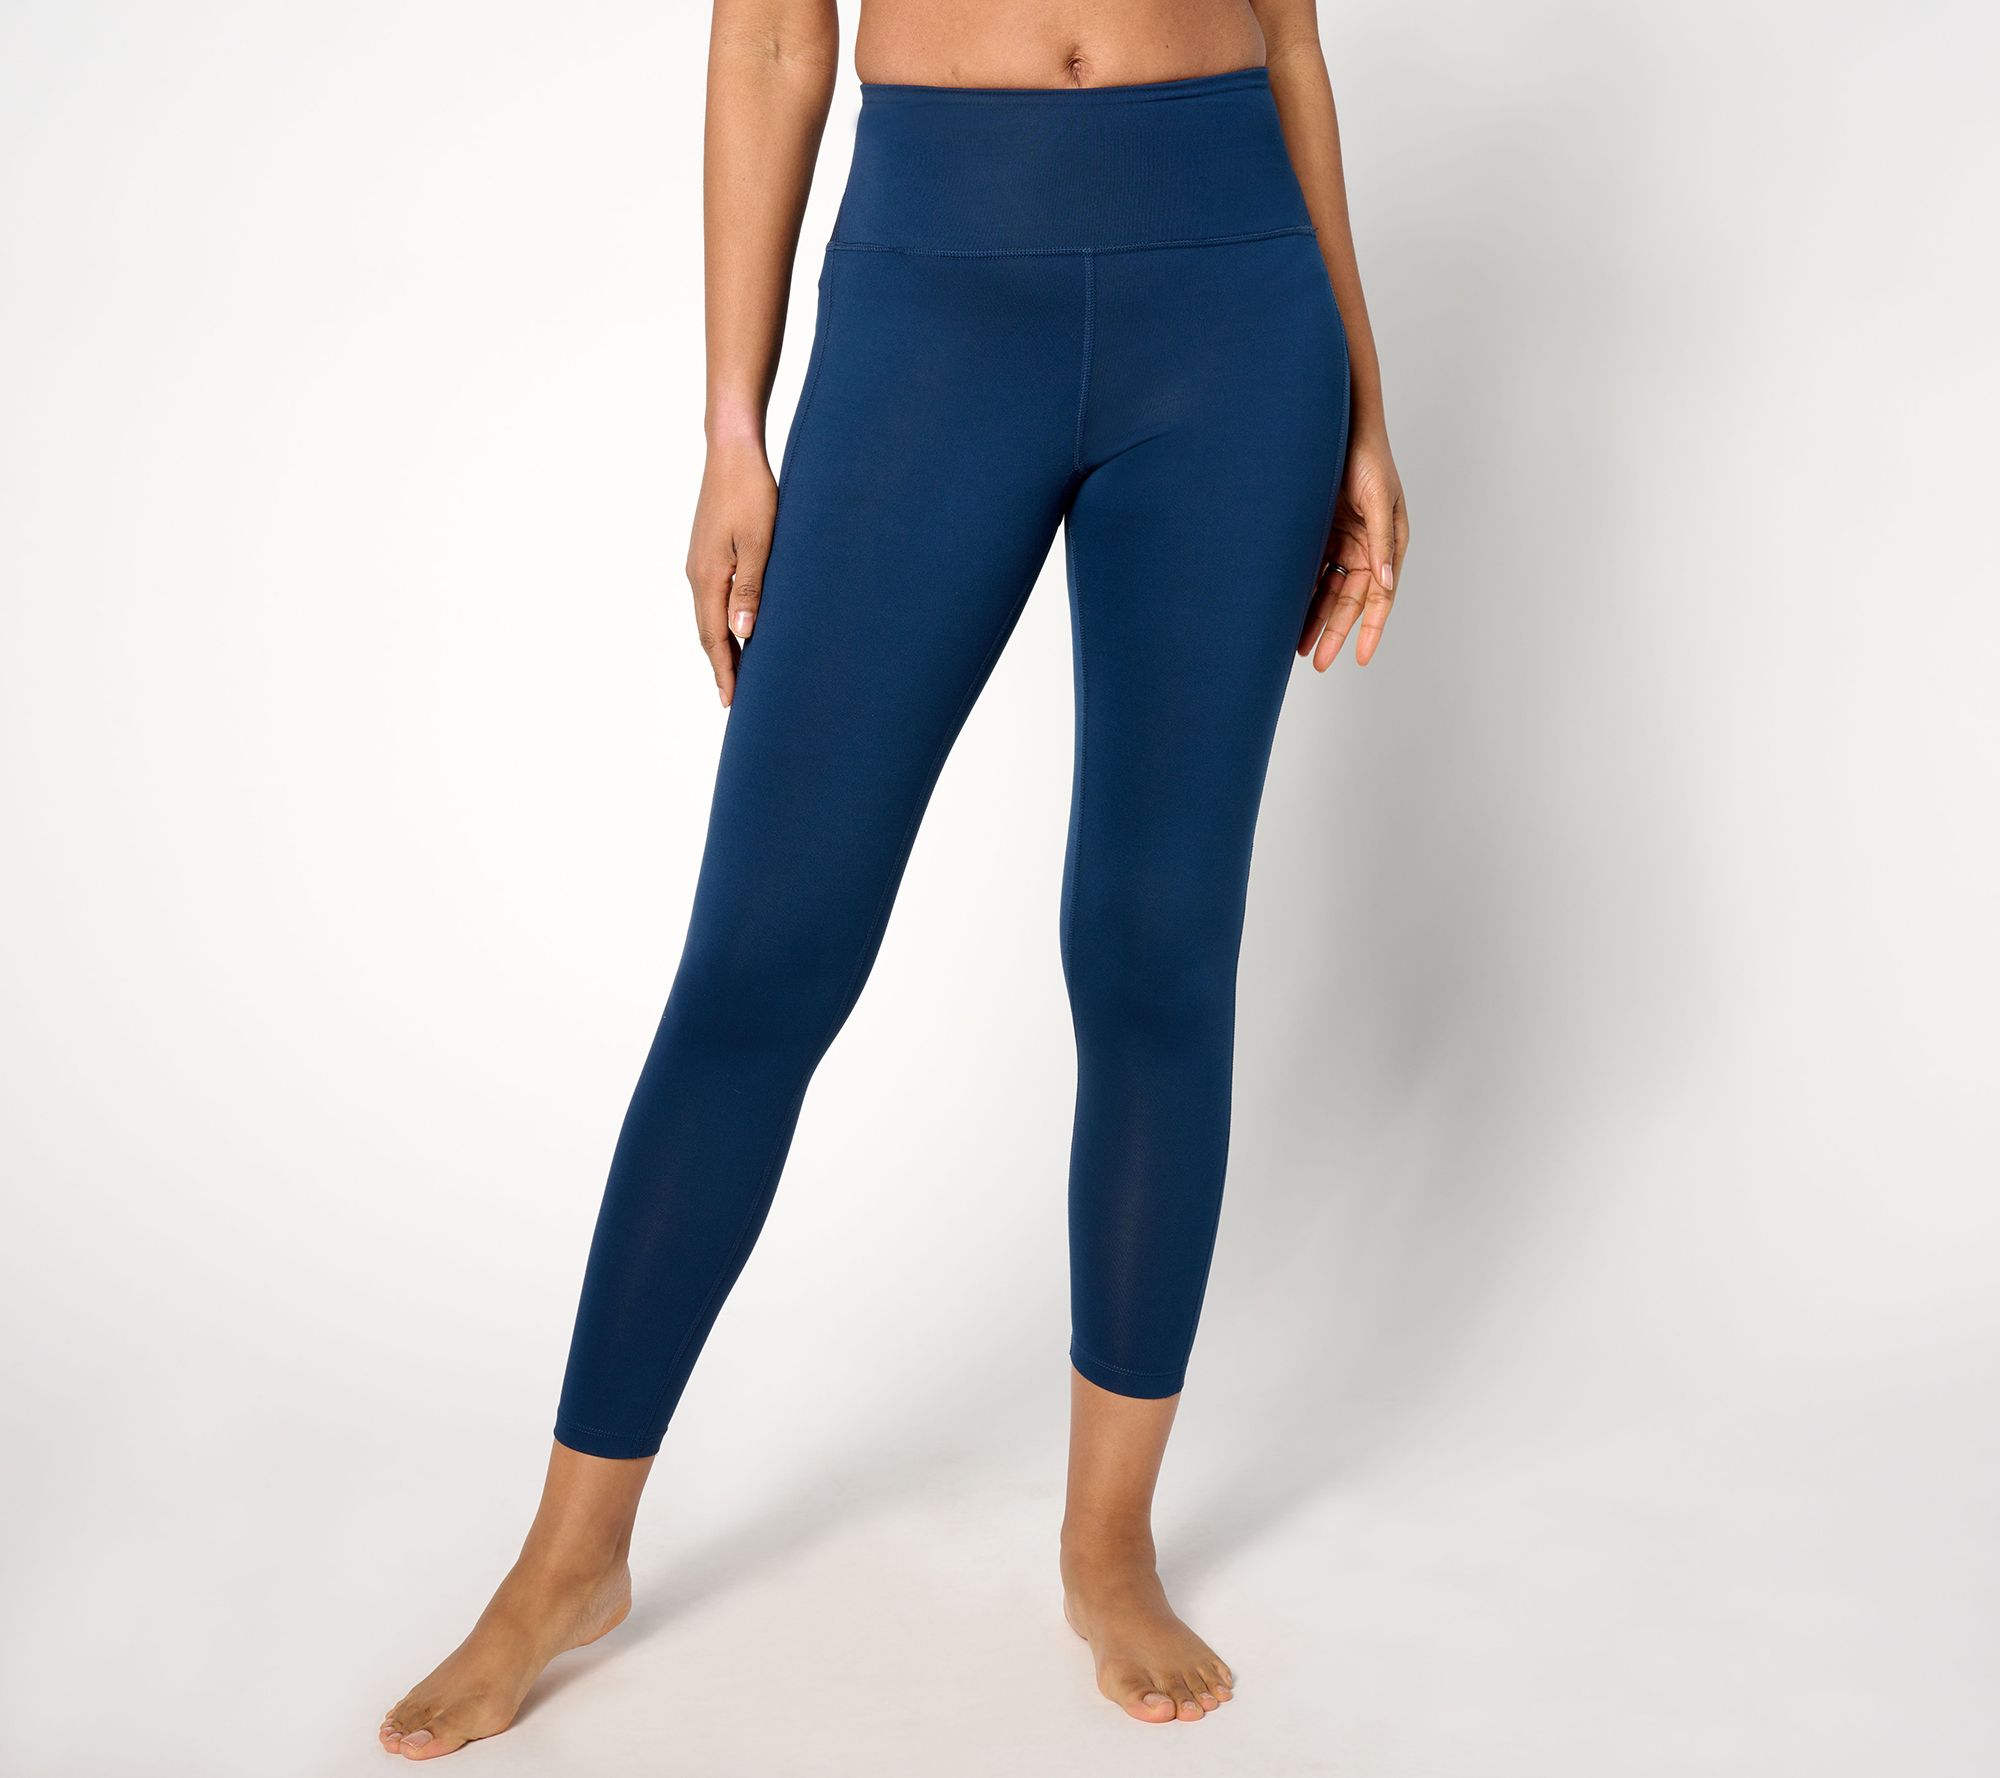 Copper Fit Compression Athletic Leggings for Women